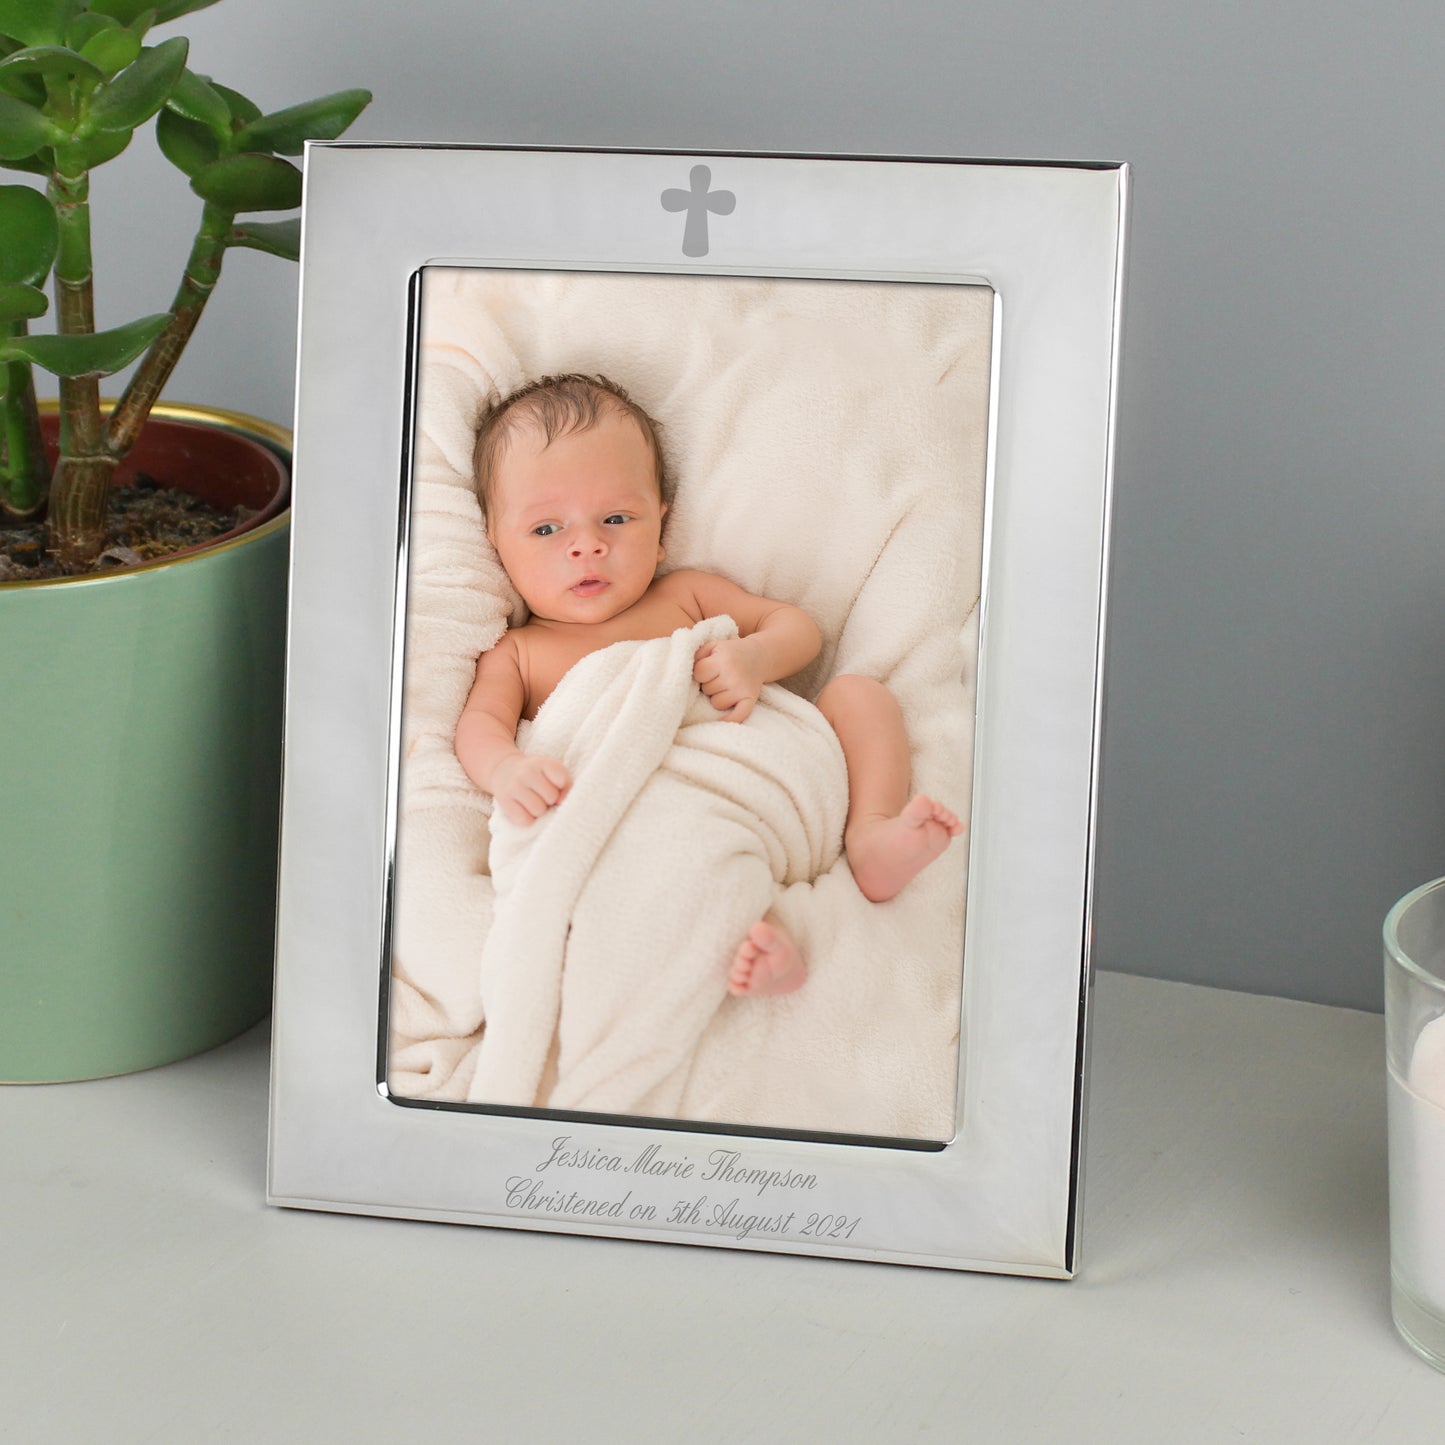 Personalised Silver Plated 5x7 Elegant Cross Photo Frame - Personalise It!